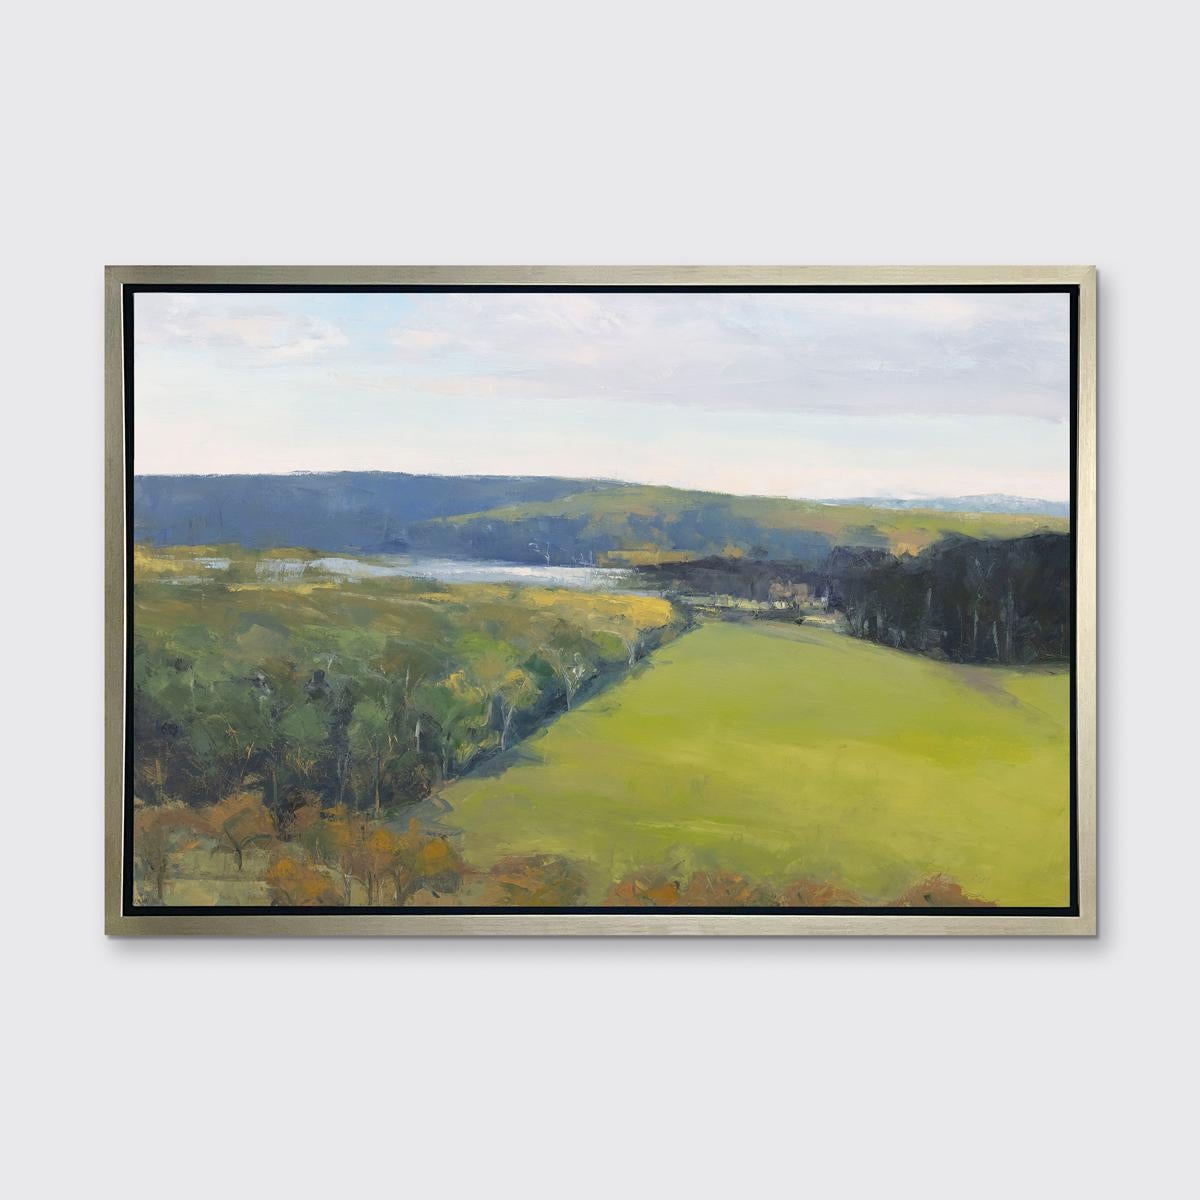 Molly Doe Wensberg Landscape Print - "Green Day" Framed Limited Edition Print, 40" x 60"